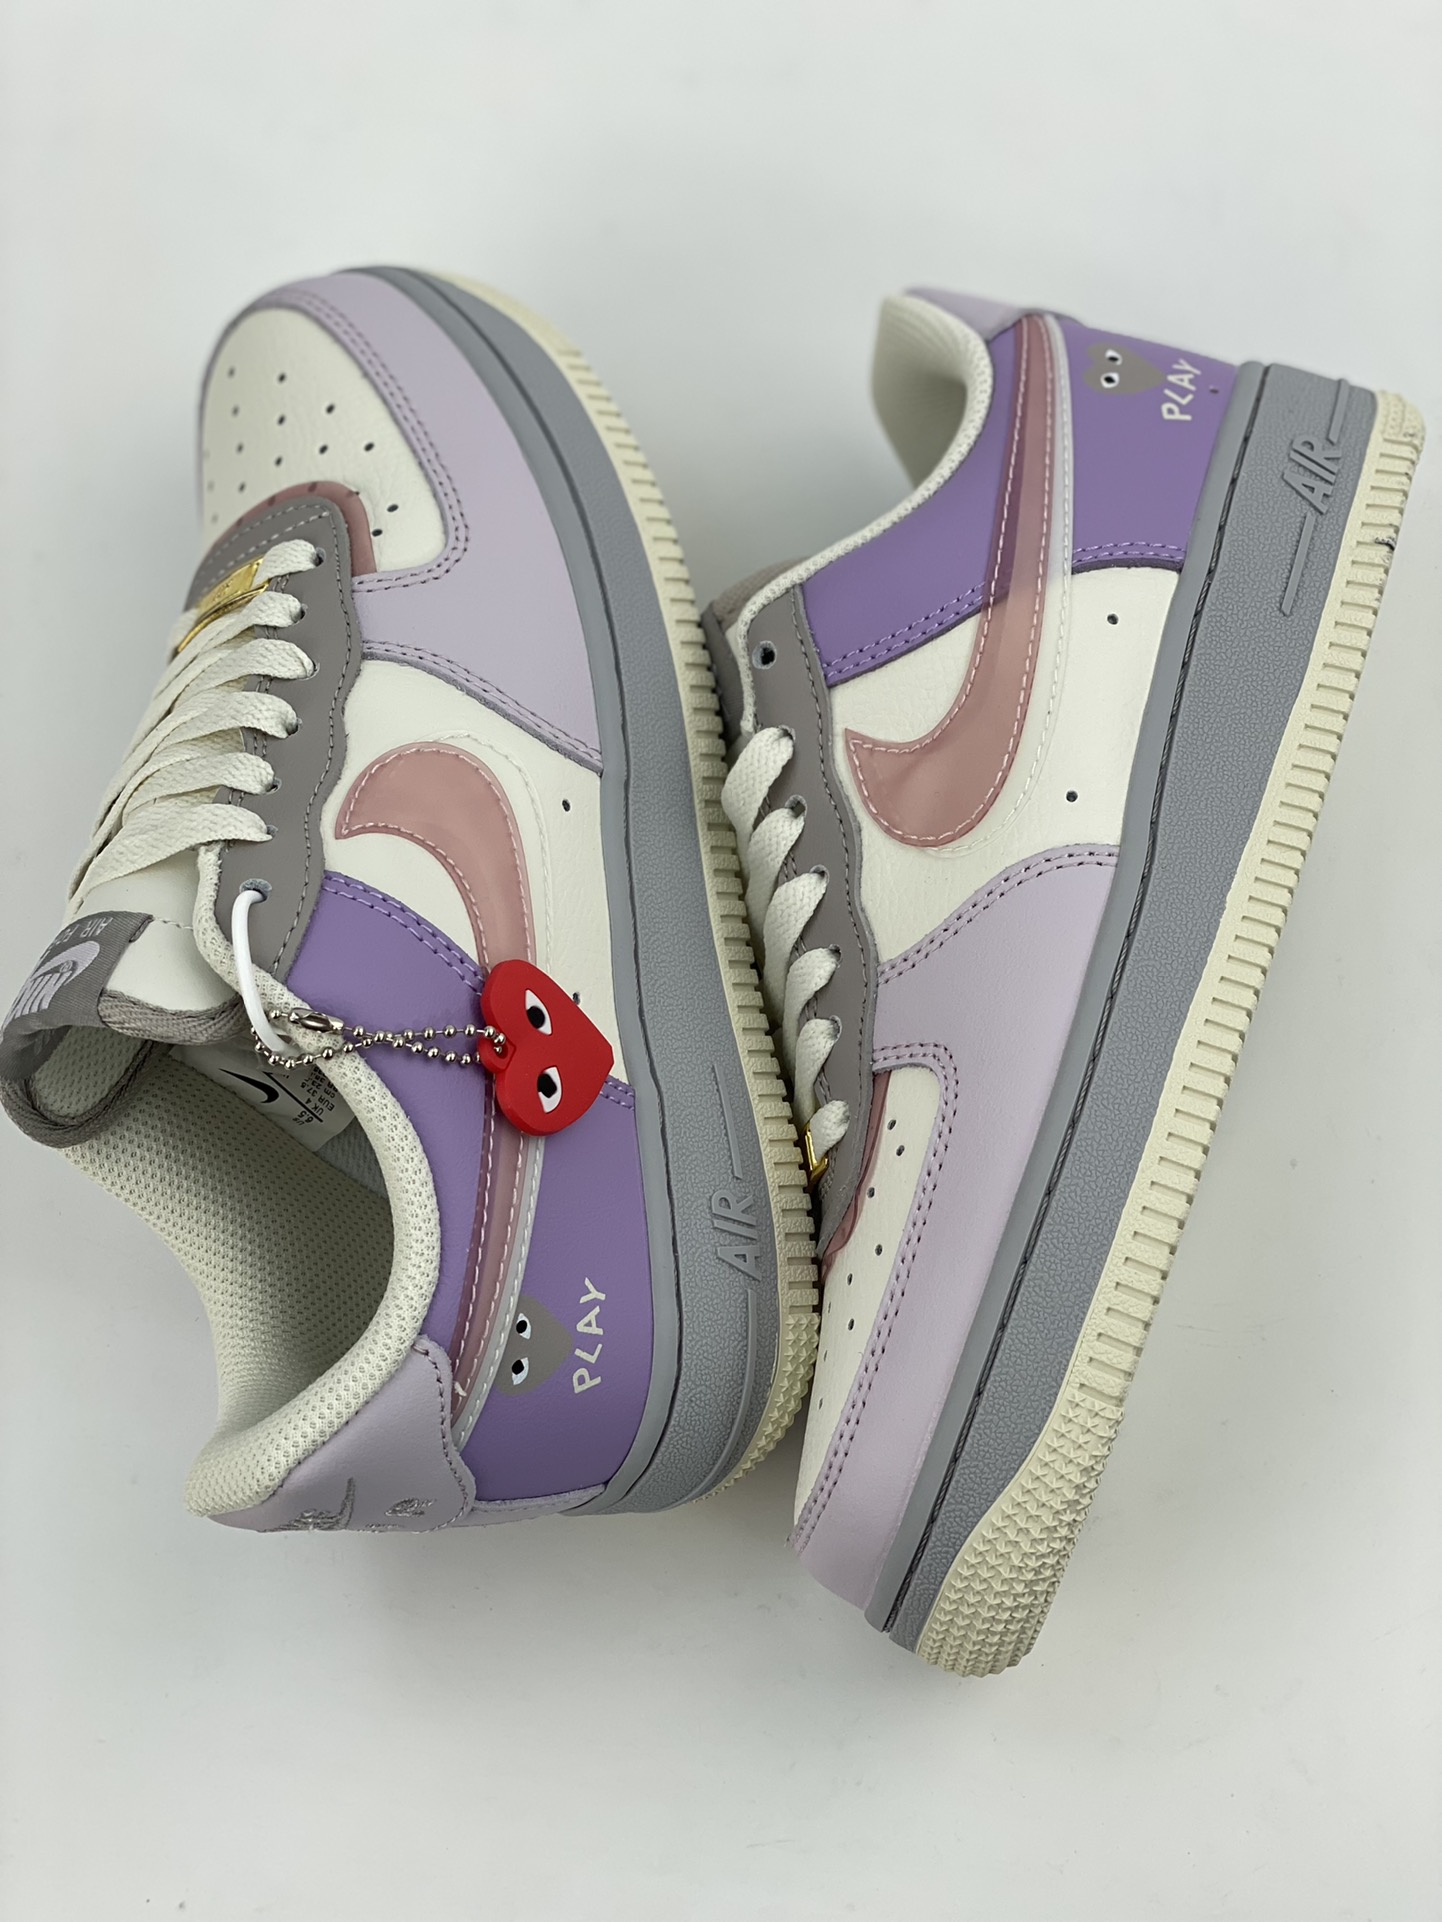 CDG x Air Force 1 '07 Low Joint White Gray Purple CJ0304-016